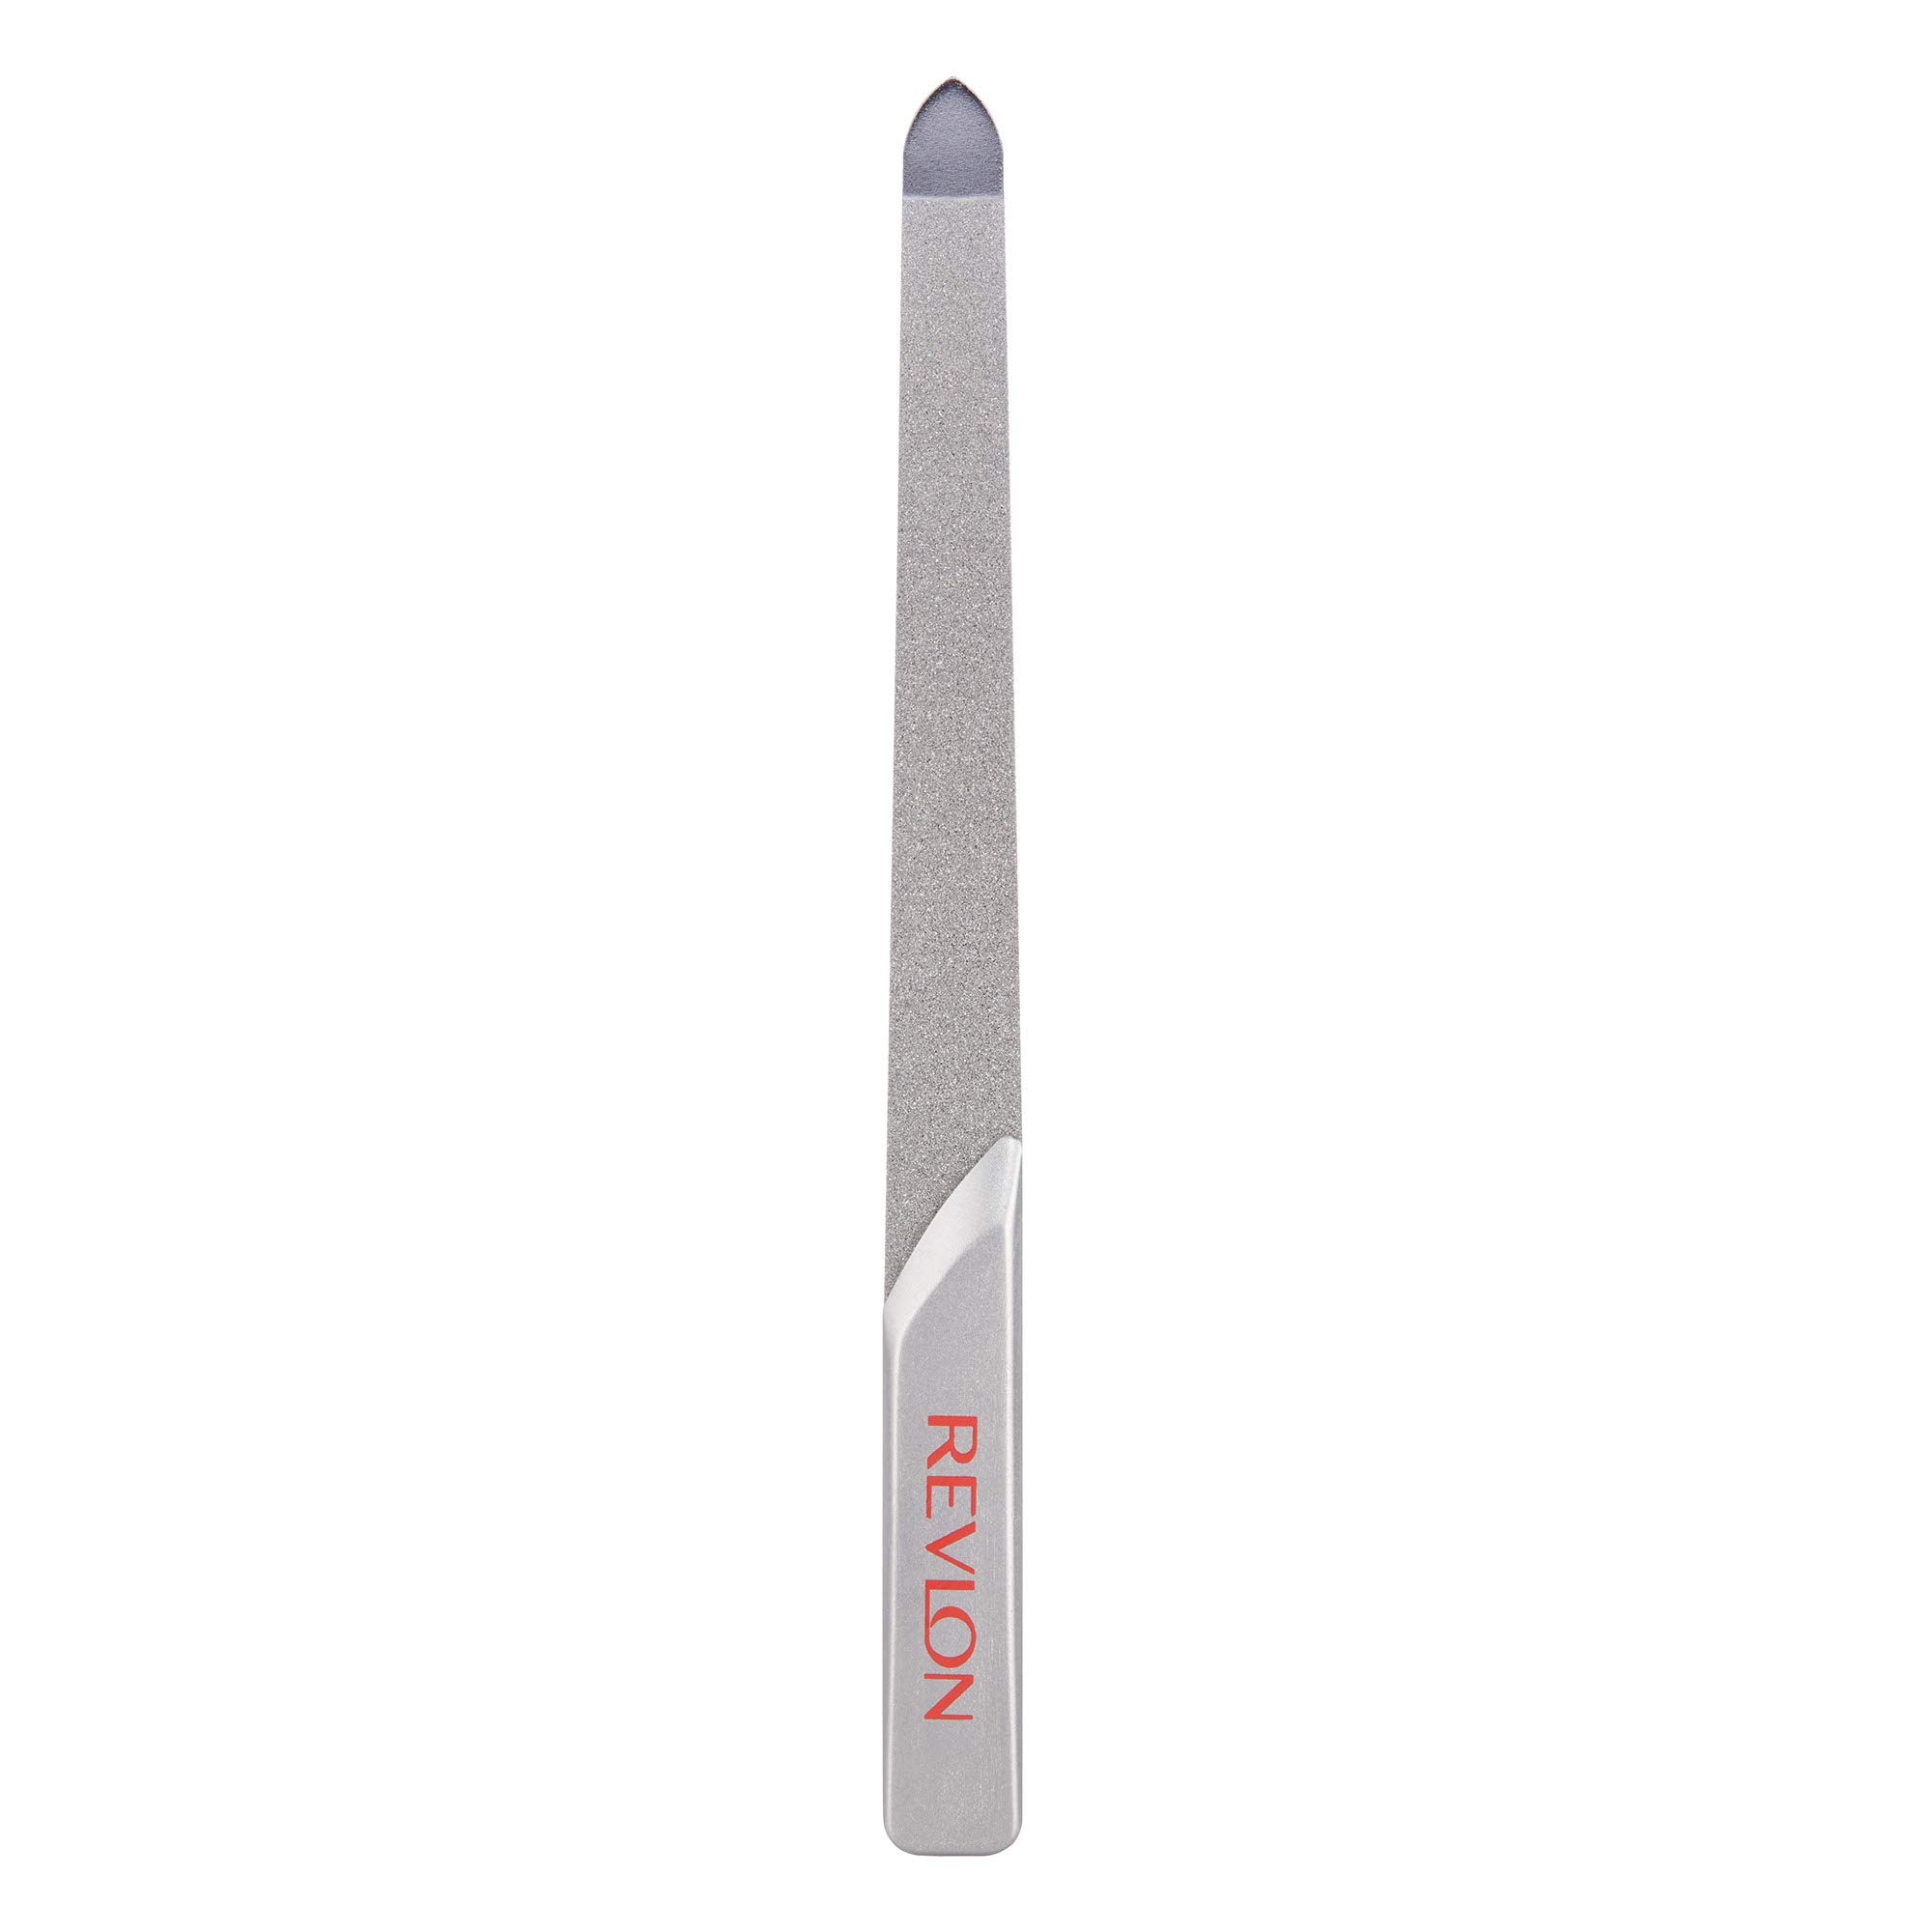 Mua Nail File by Revlon, Salon Professional Nail Care Tool for Acrylic &  Natural Nails, Easy Grip, Corrosion Resistant Saphire Coated Nail Filer  (Pack of 1) trên Amazon Mỹ chính hãng 2023 | Fado